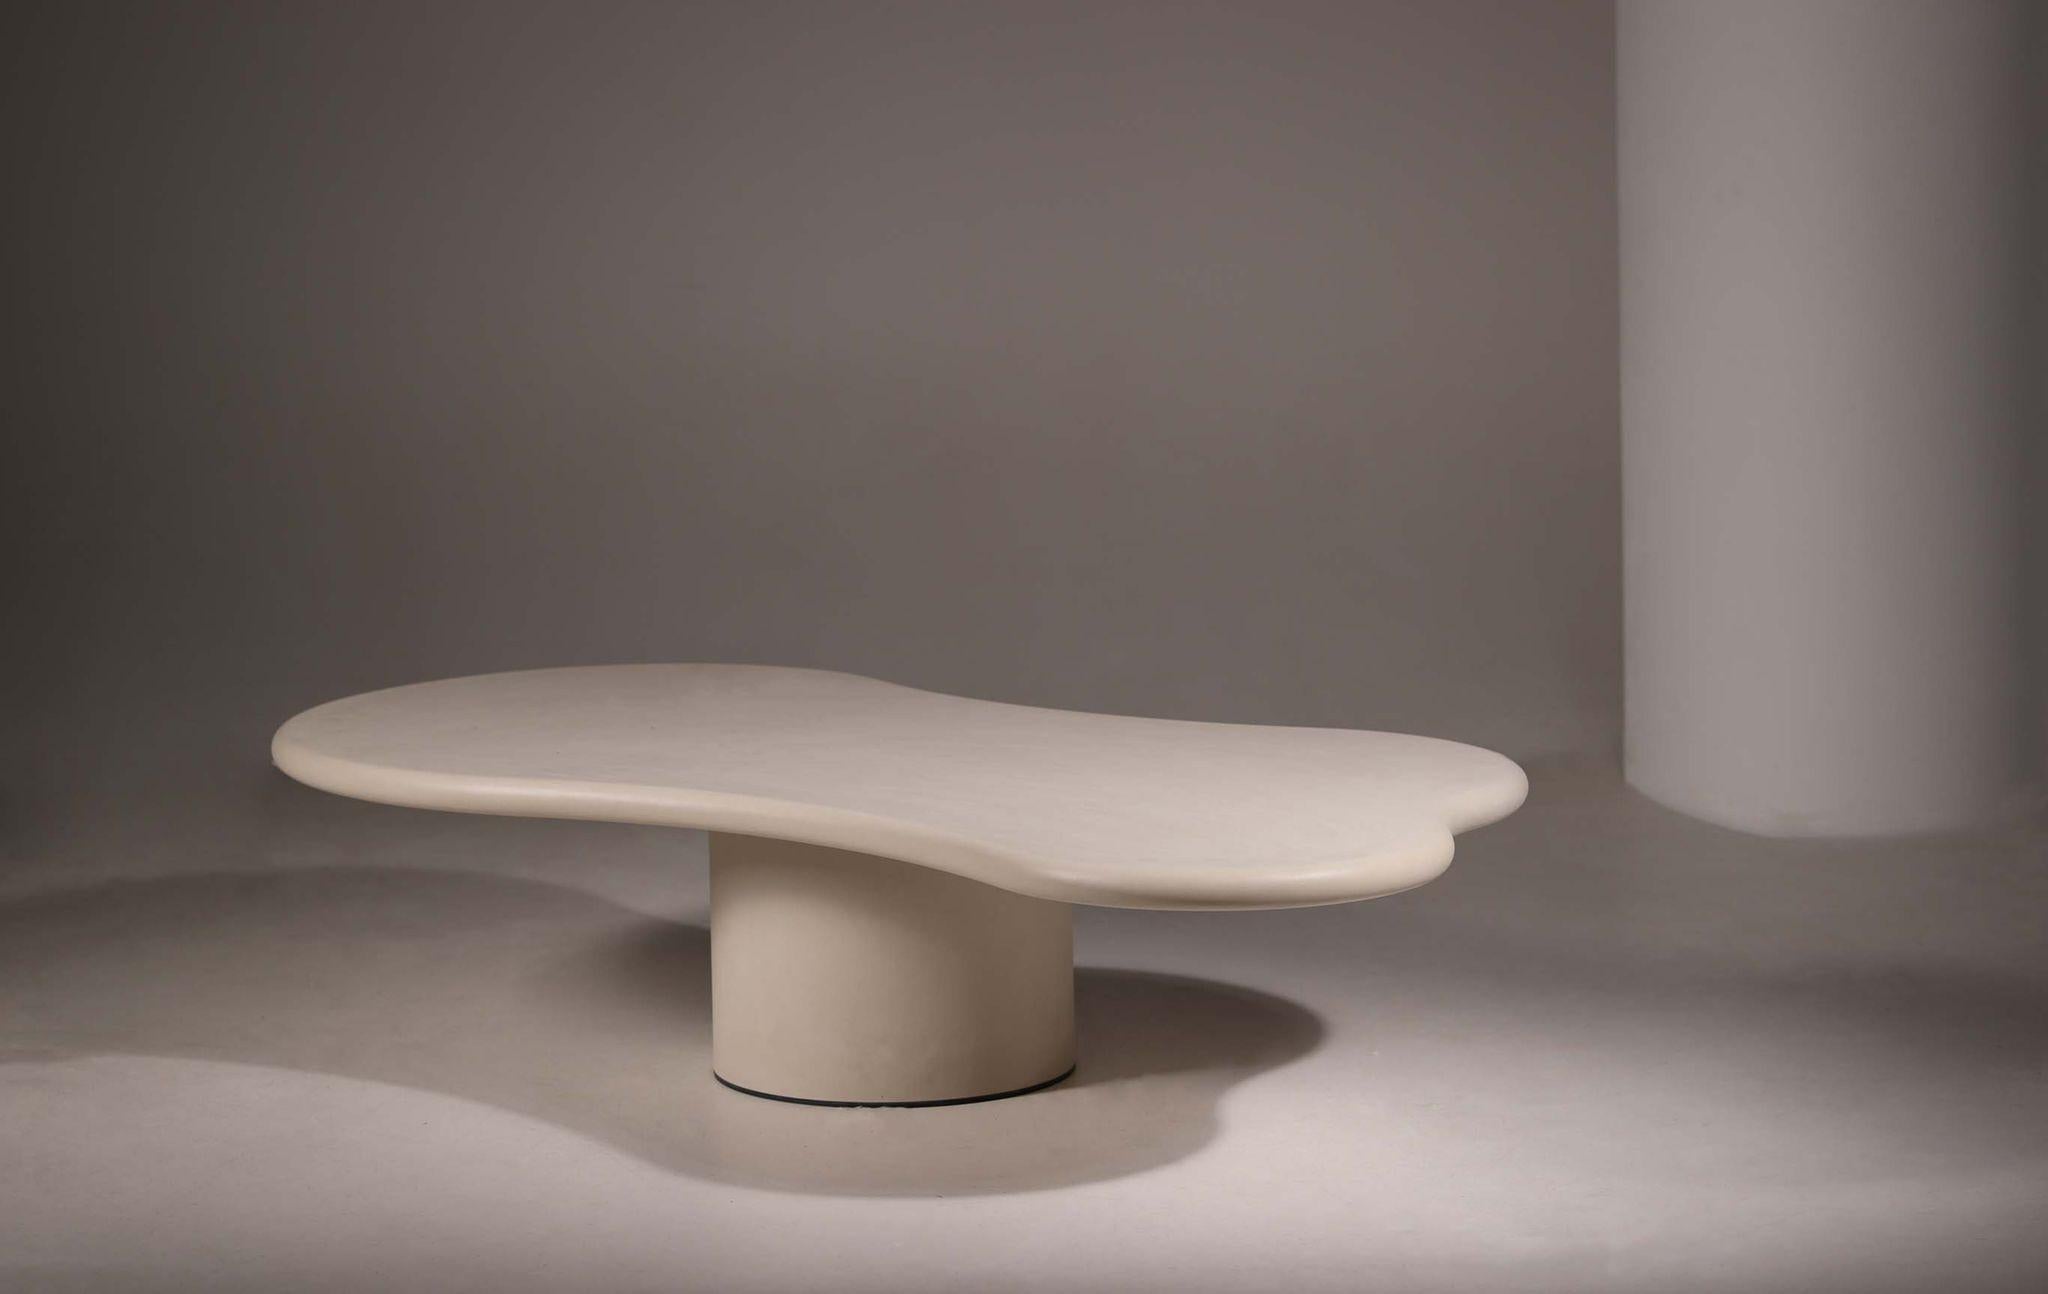 Organic Material Handmade Outdoor Rock-Shaped Natural Plaster Table Set by Philippe Colette